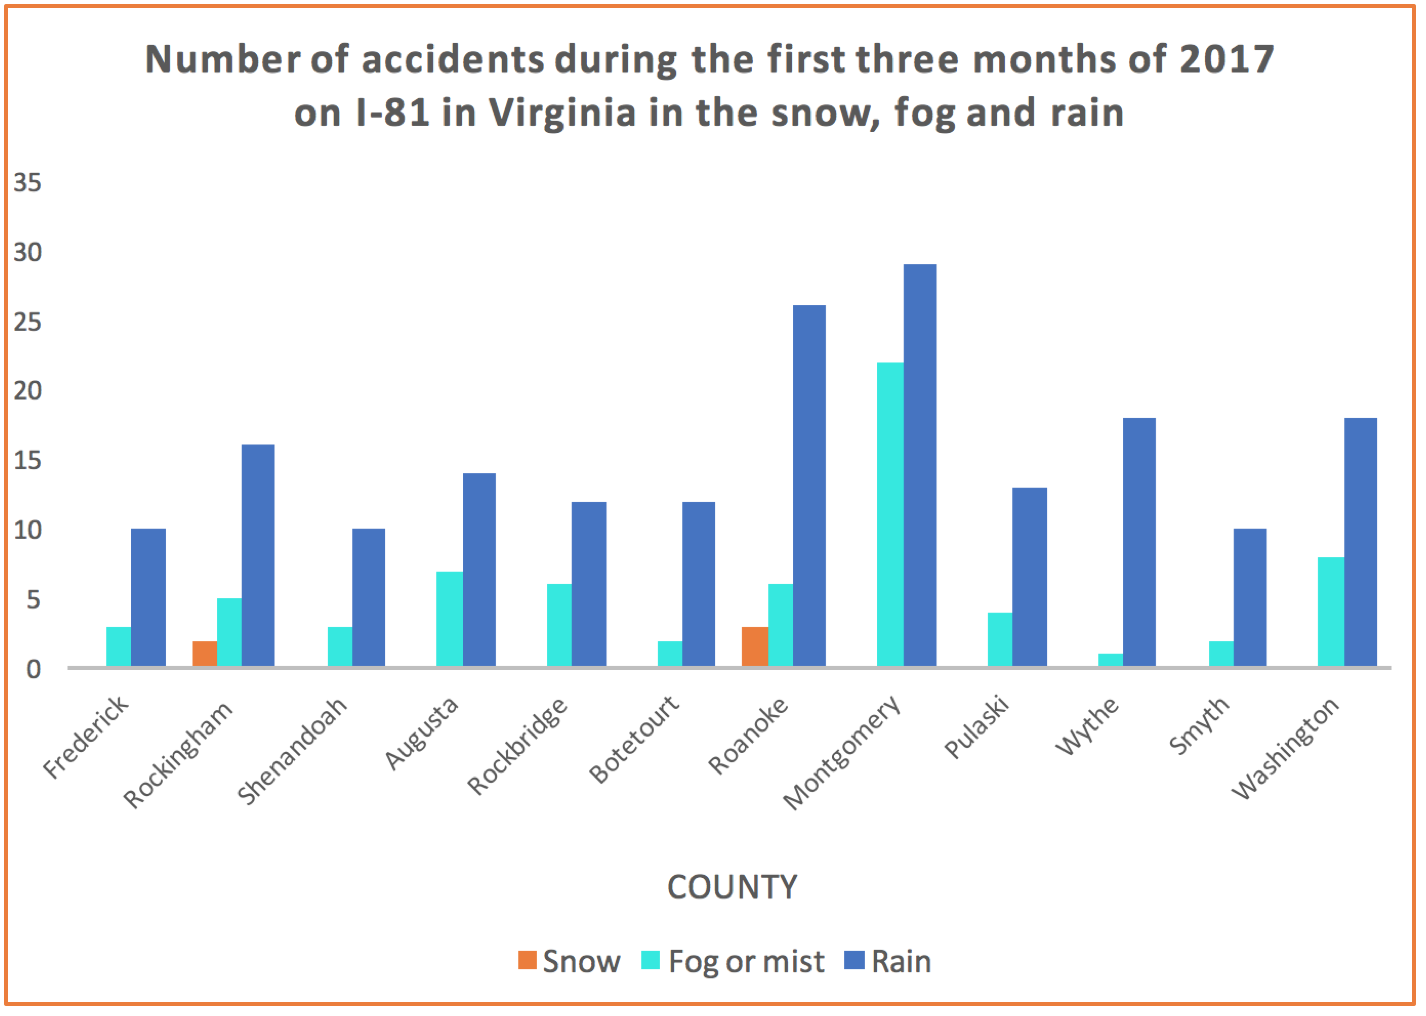 graphic displaying accidents that occurred in the snow, rain and fog on I-81 in Virginia during the first three months of 2017